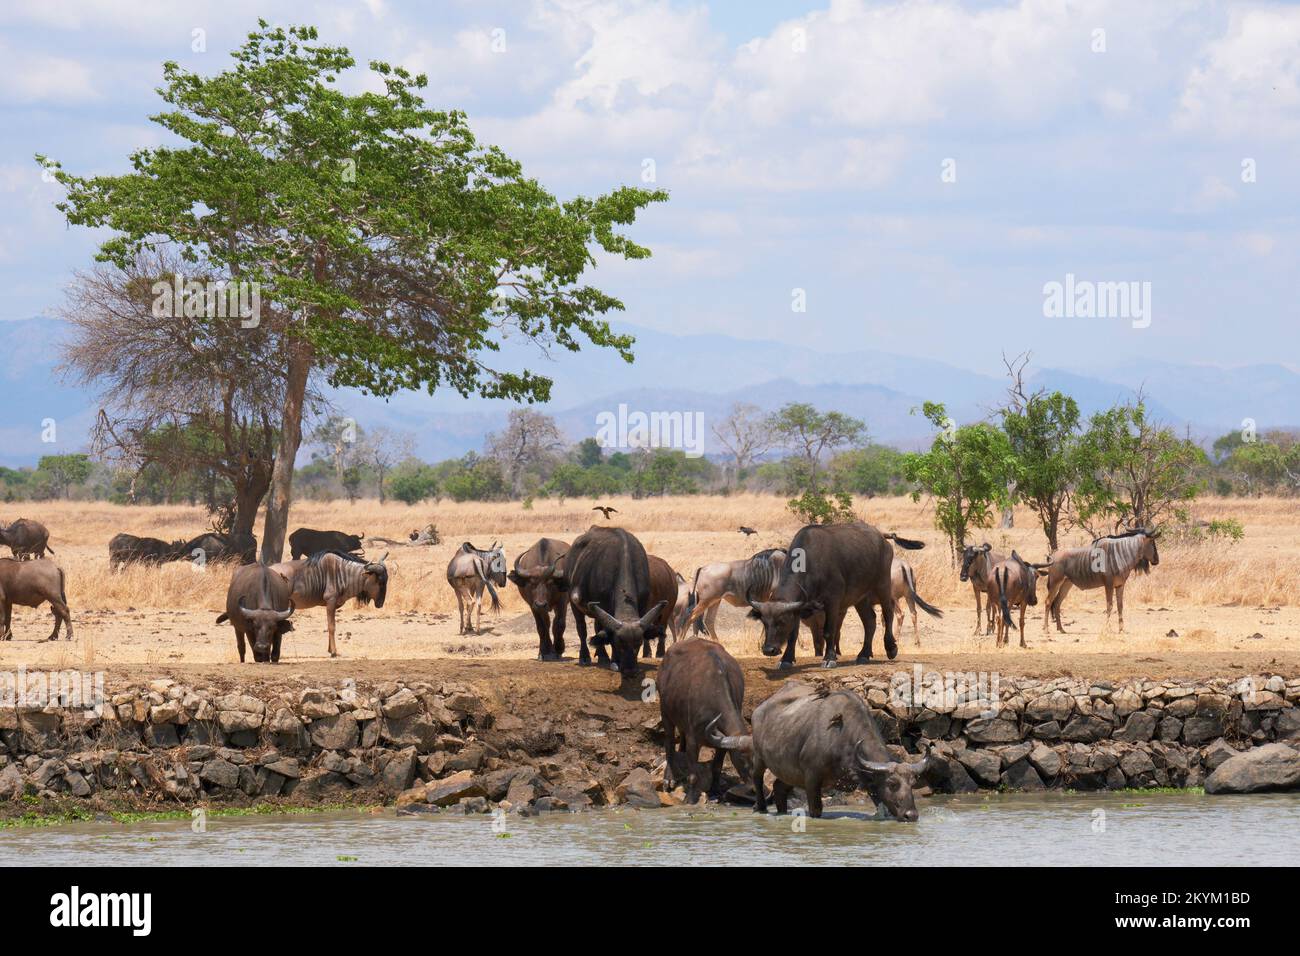 Buffalo, carrying Oxpecker tick eating birds, and Wildebeest stop in a watering hole to drink in the midday heat of  Mikumi National park in dry seaso Stock Photo